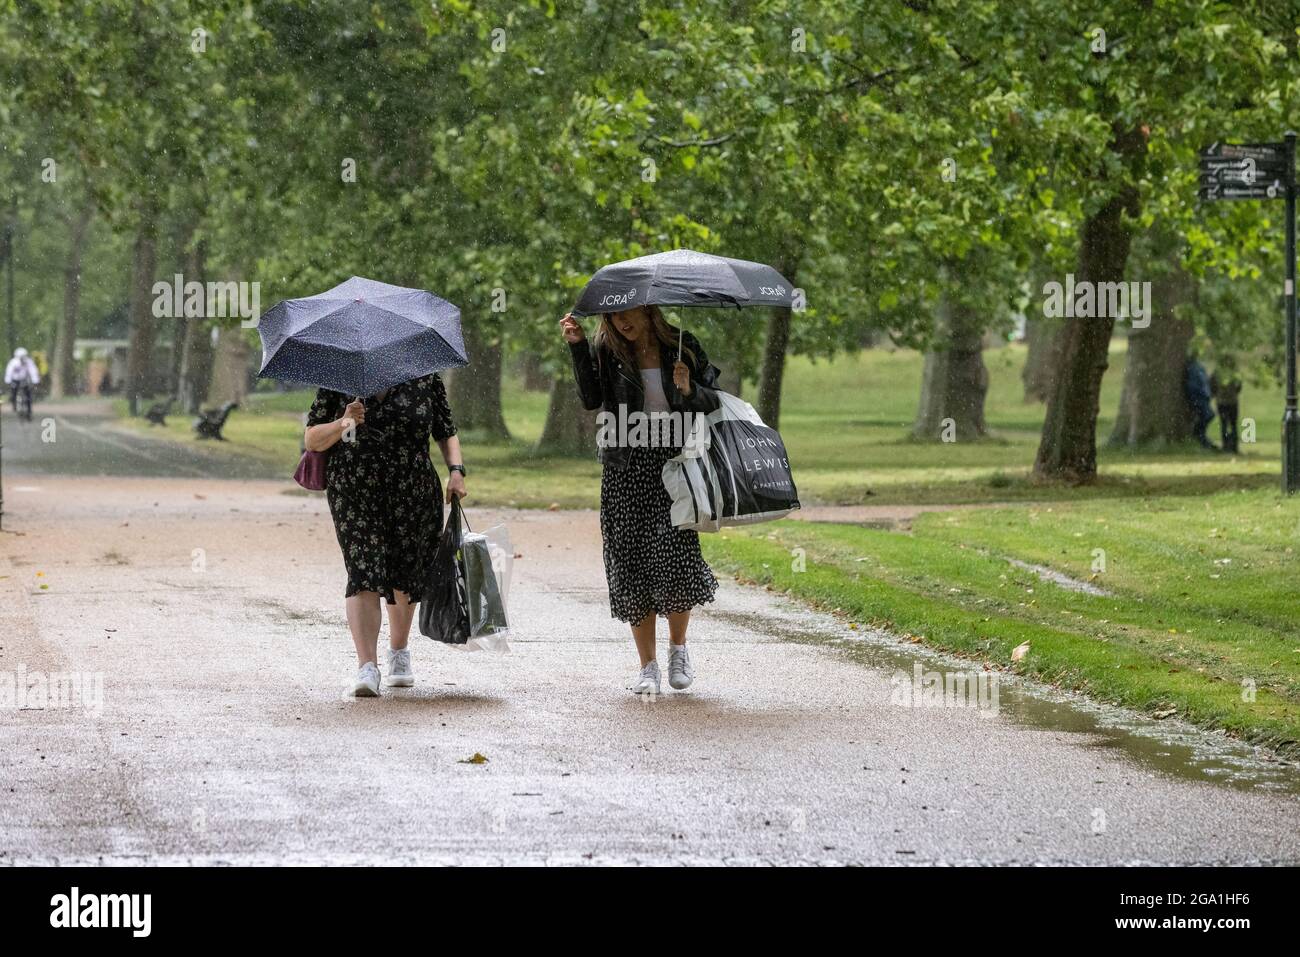 London, UK. July 28 2021: London, UK. July 28 2021: Heavy Rain Showers, Central London, England, UK Picture shows a couple taking cover underneath their umbrellas fas they make their way through the the rain in Hyde Park after some shopping as heavy rain showers sweep across Central London and southern parts of England. Credit: Clickpics/Alamy Live News Stock Photo